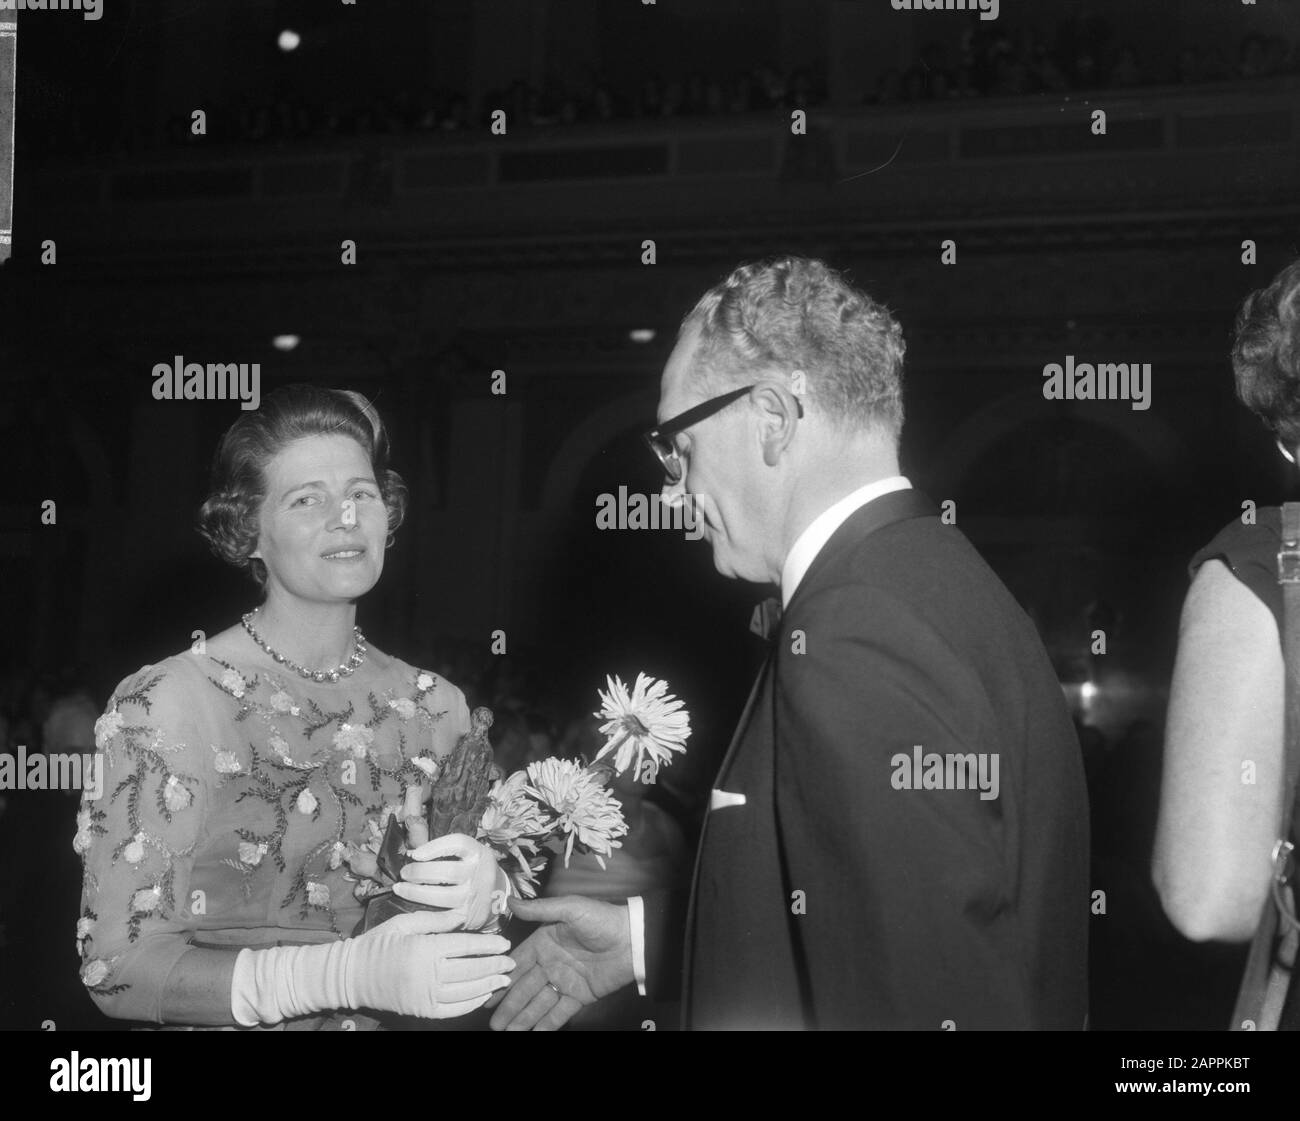 Grand Gala du Disque Classique 1965 in the Concertgebouw in Amsterdam  Mrs Mary Soames while receiving an Edison from Minister Happy Date: 29 October 1965 Location: Amsterdam, Noord-Holland Keywords: cultural prizes, classical music, ministers, musicians, awards ceremonies Personal name: Soames, Mary, Merry, Maarten Stock Photo